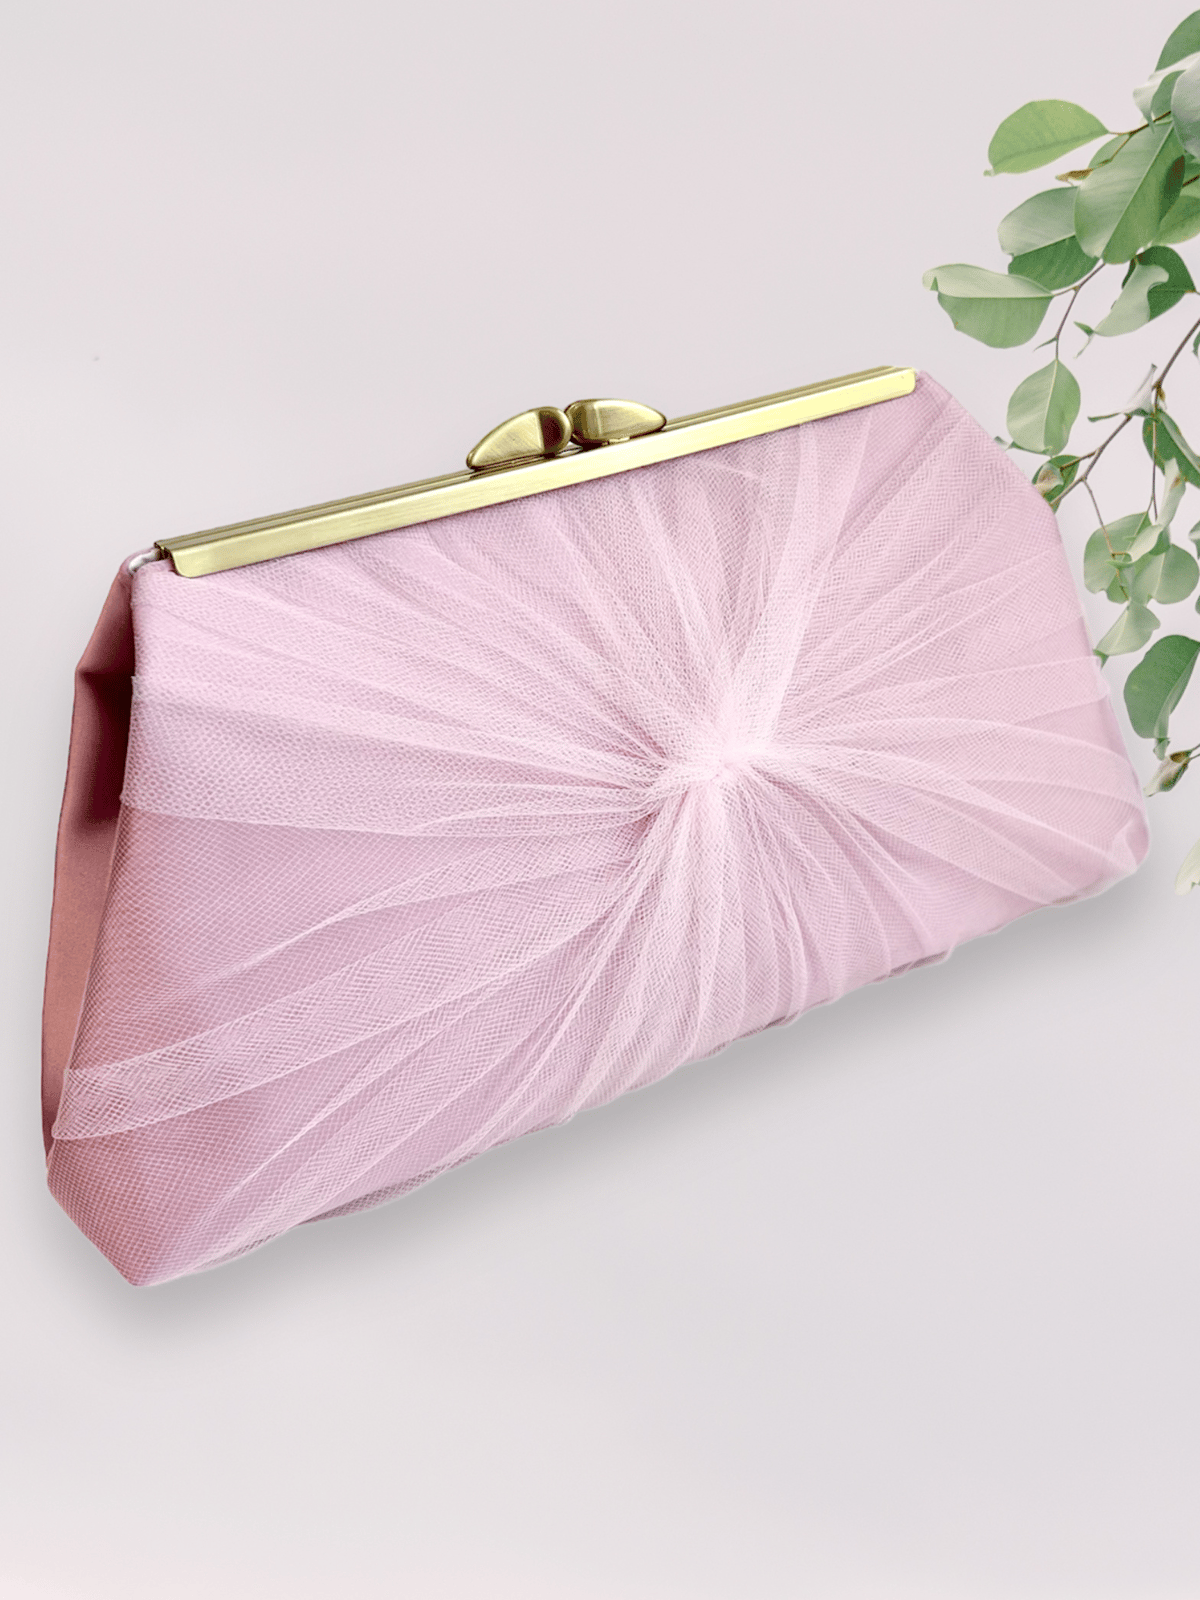 Fuchsia Pink Floral Design Clutch Purse, Clutch Purse, Pink Clutch Bag,  Wedding Clutch Bag, Clutch Bag, Gifts for Her, Ladies Gifts - Etsy